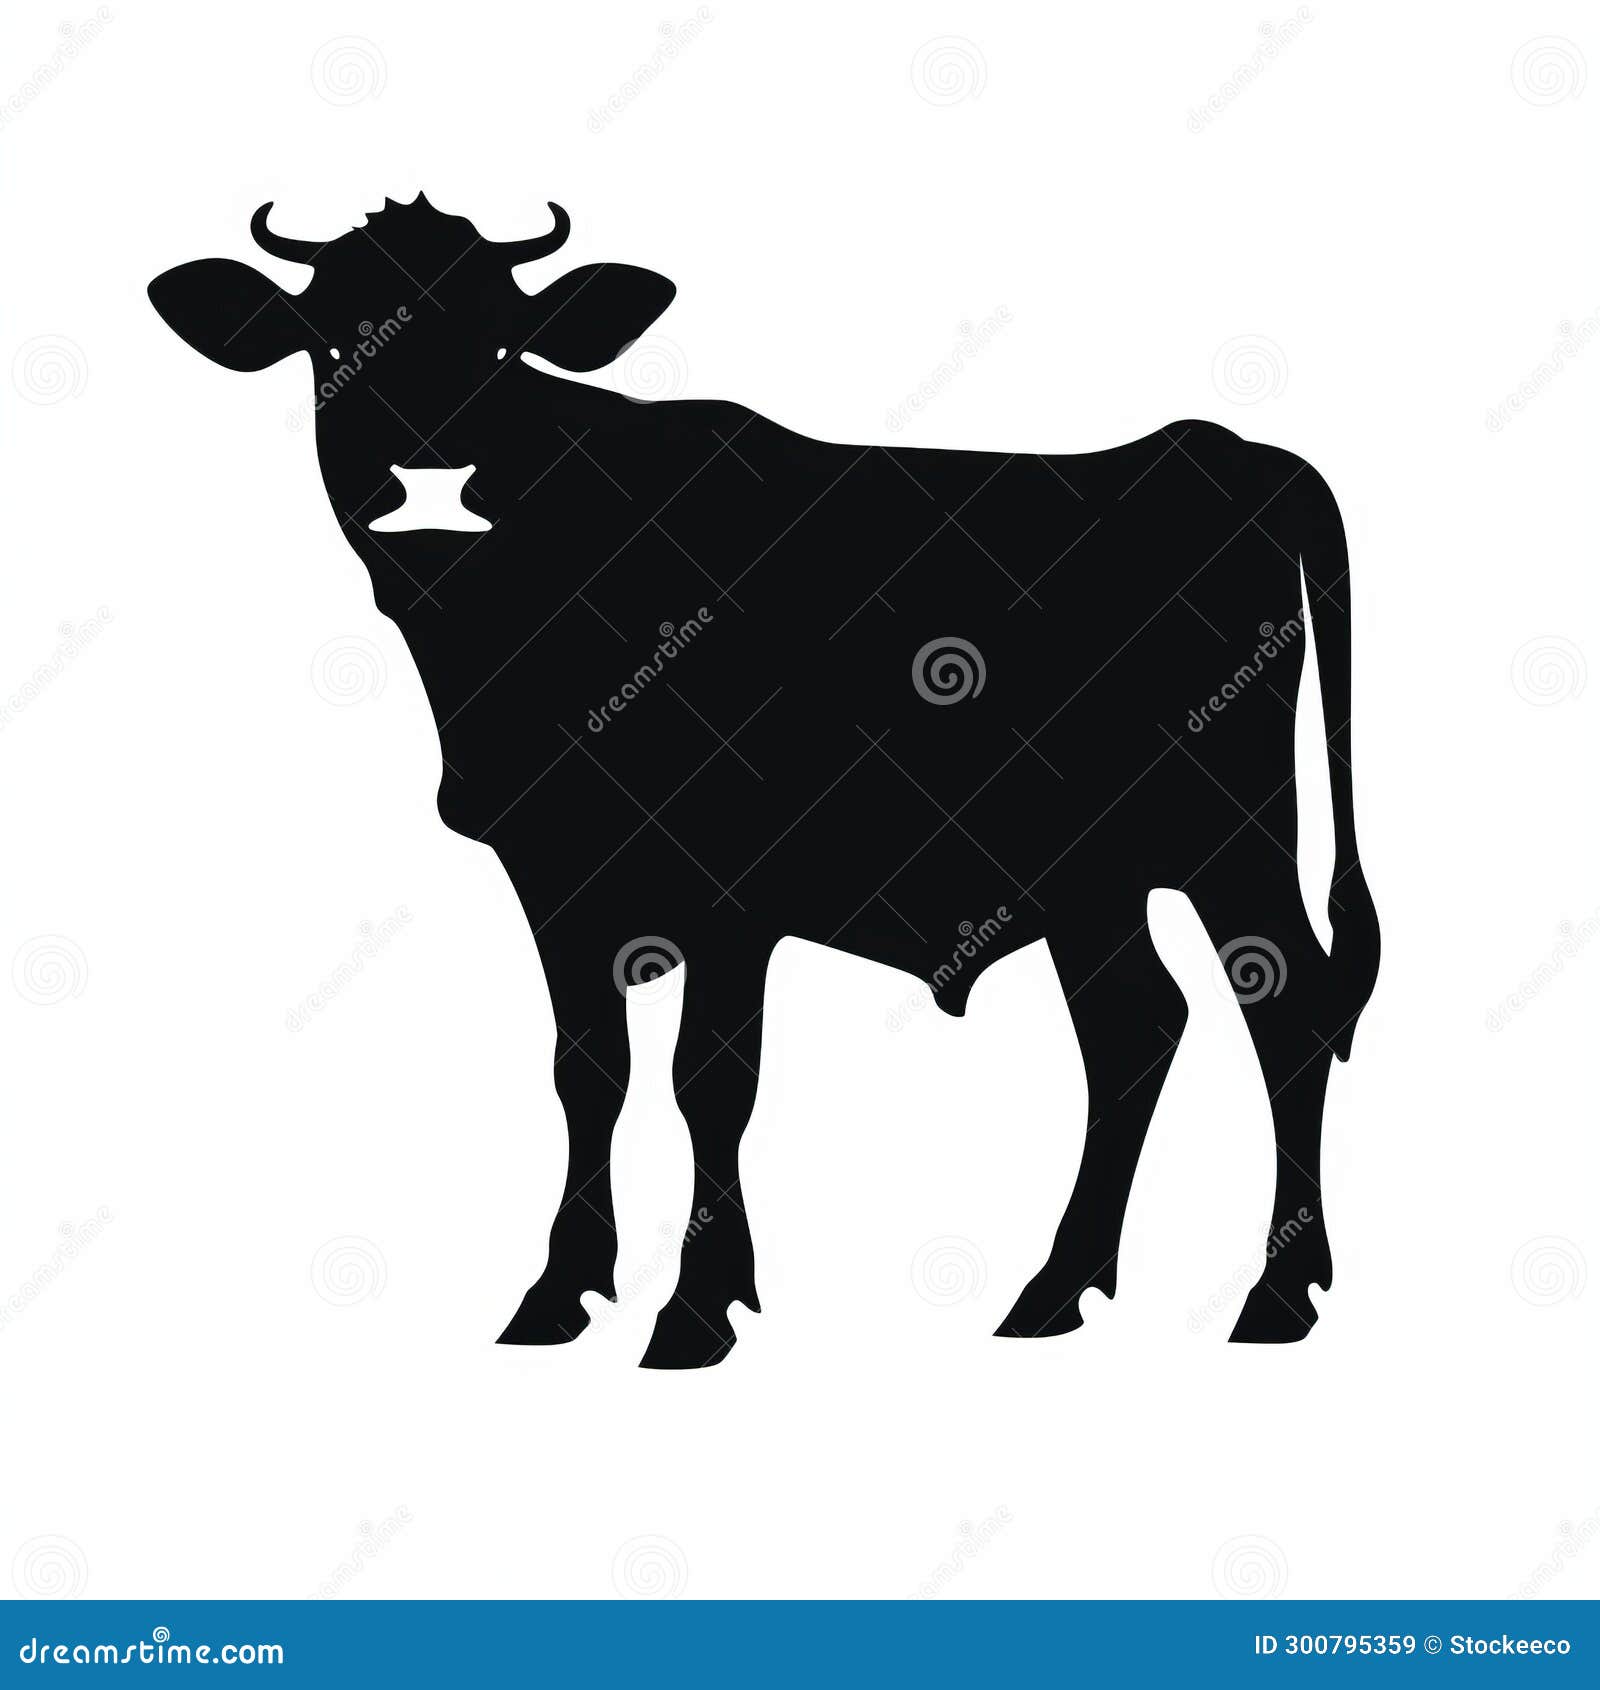 cow silhouette on white background: wimmelbilder and americana iconography